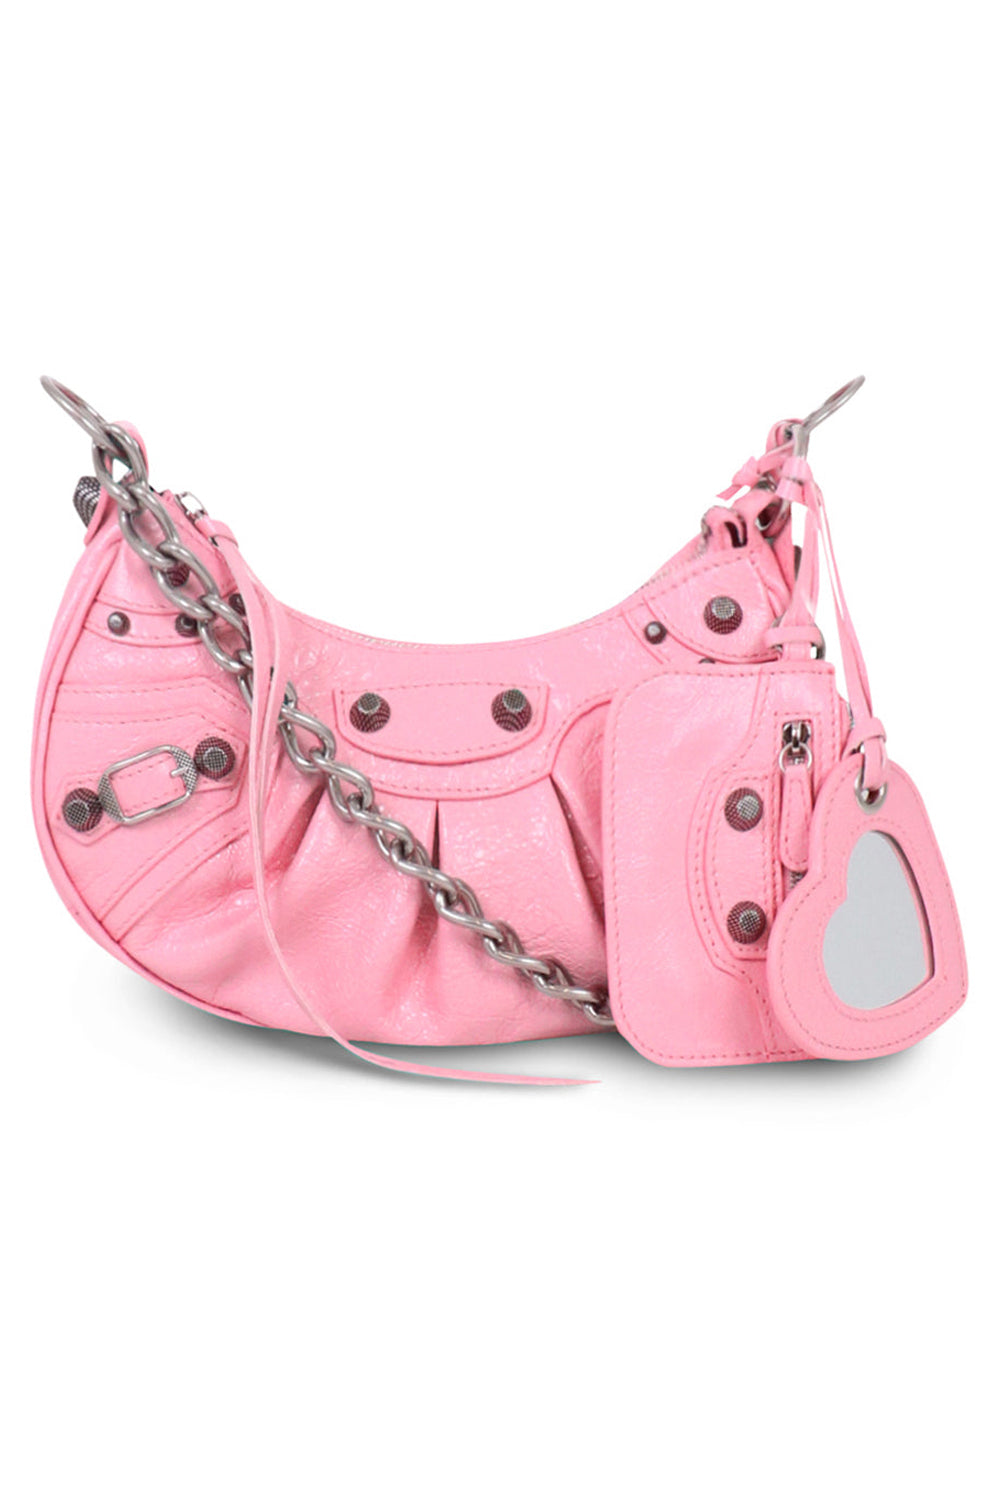 BALENCIAGA BAGS Pink LE CAGOLE XS CHAIN SHOULDER BAG | SWEET PINK/SILVER